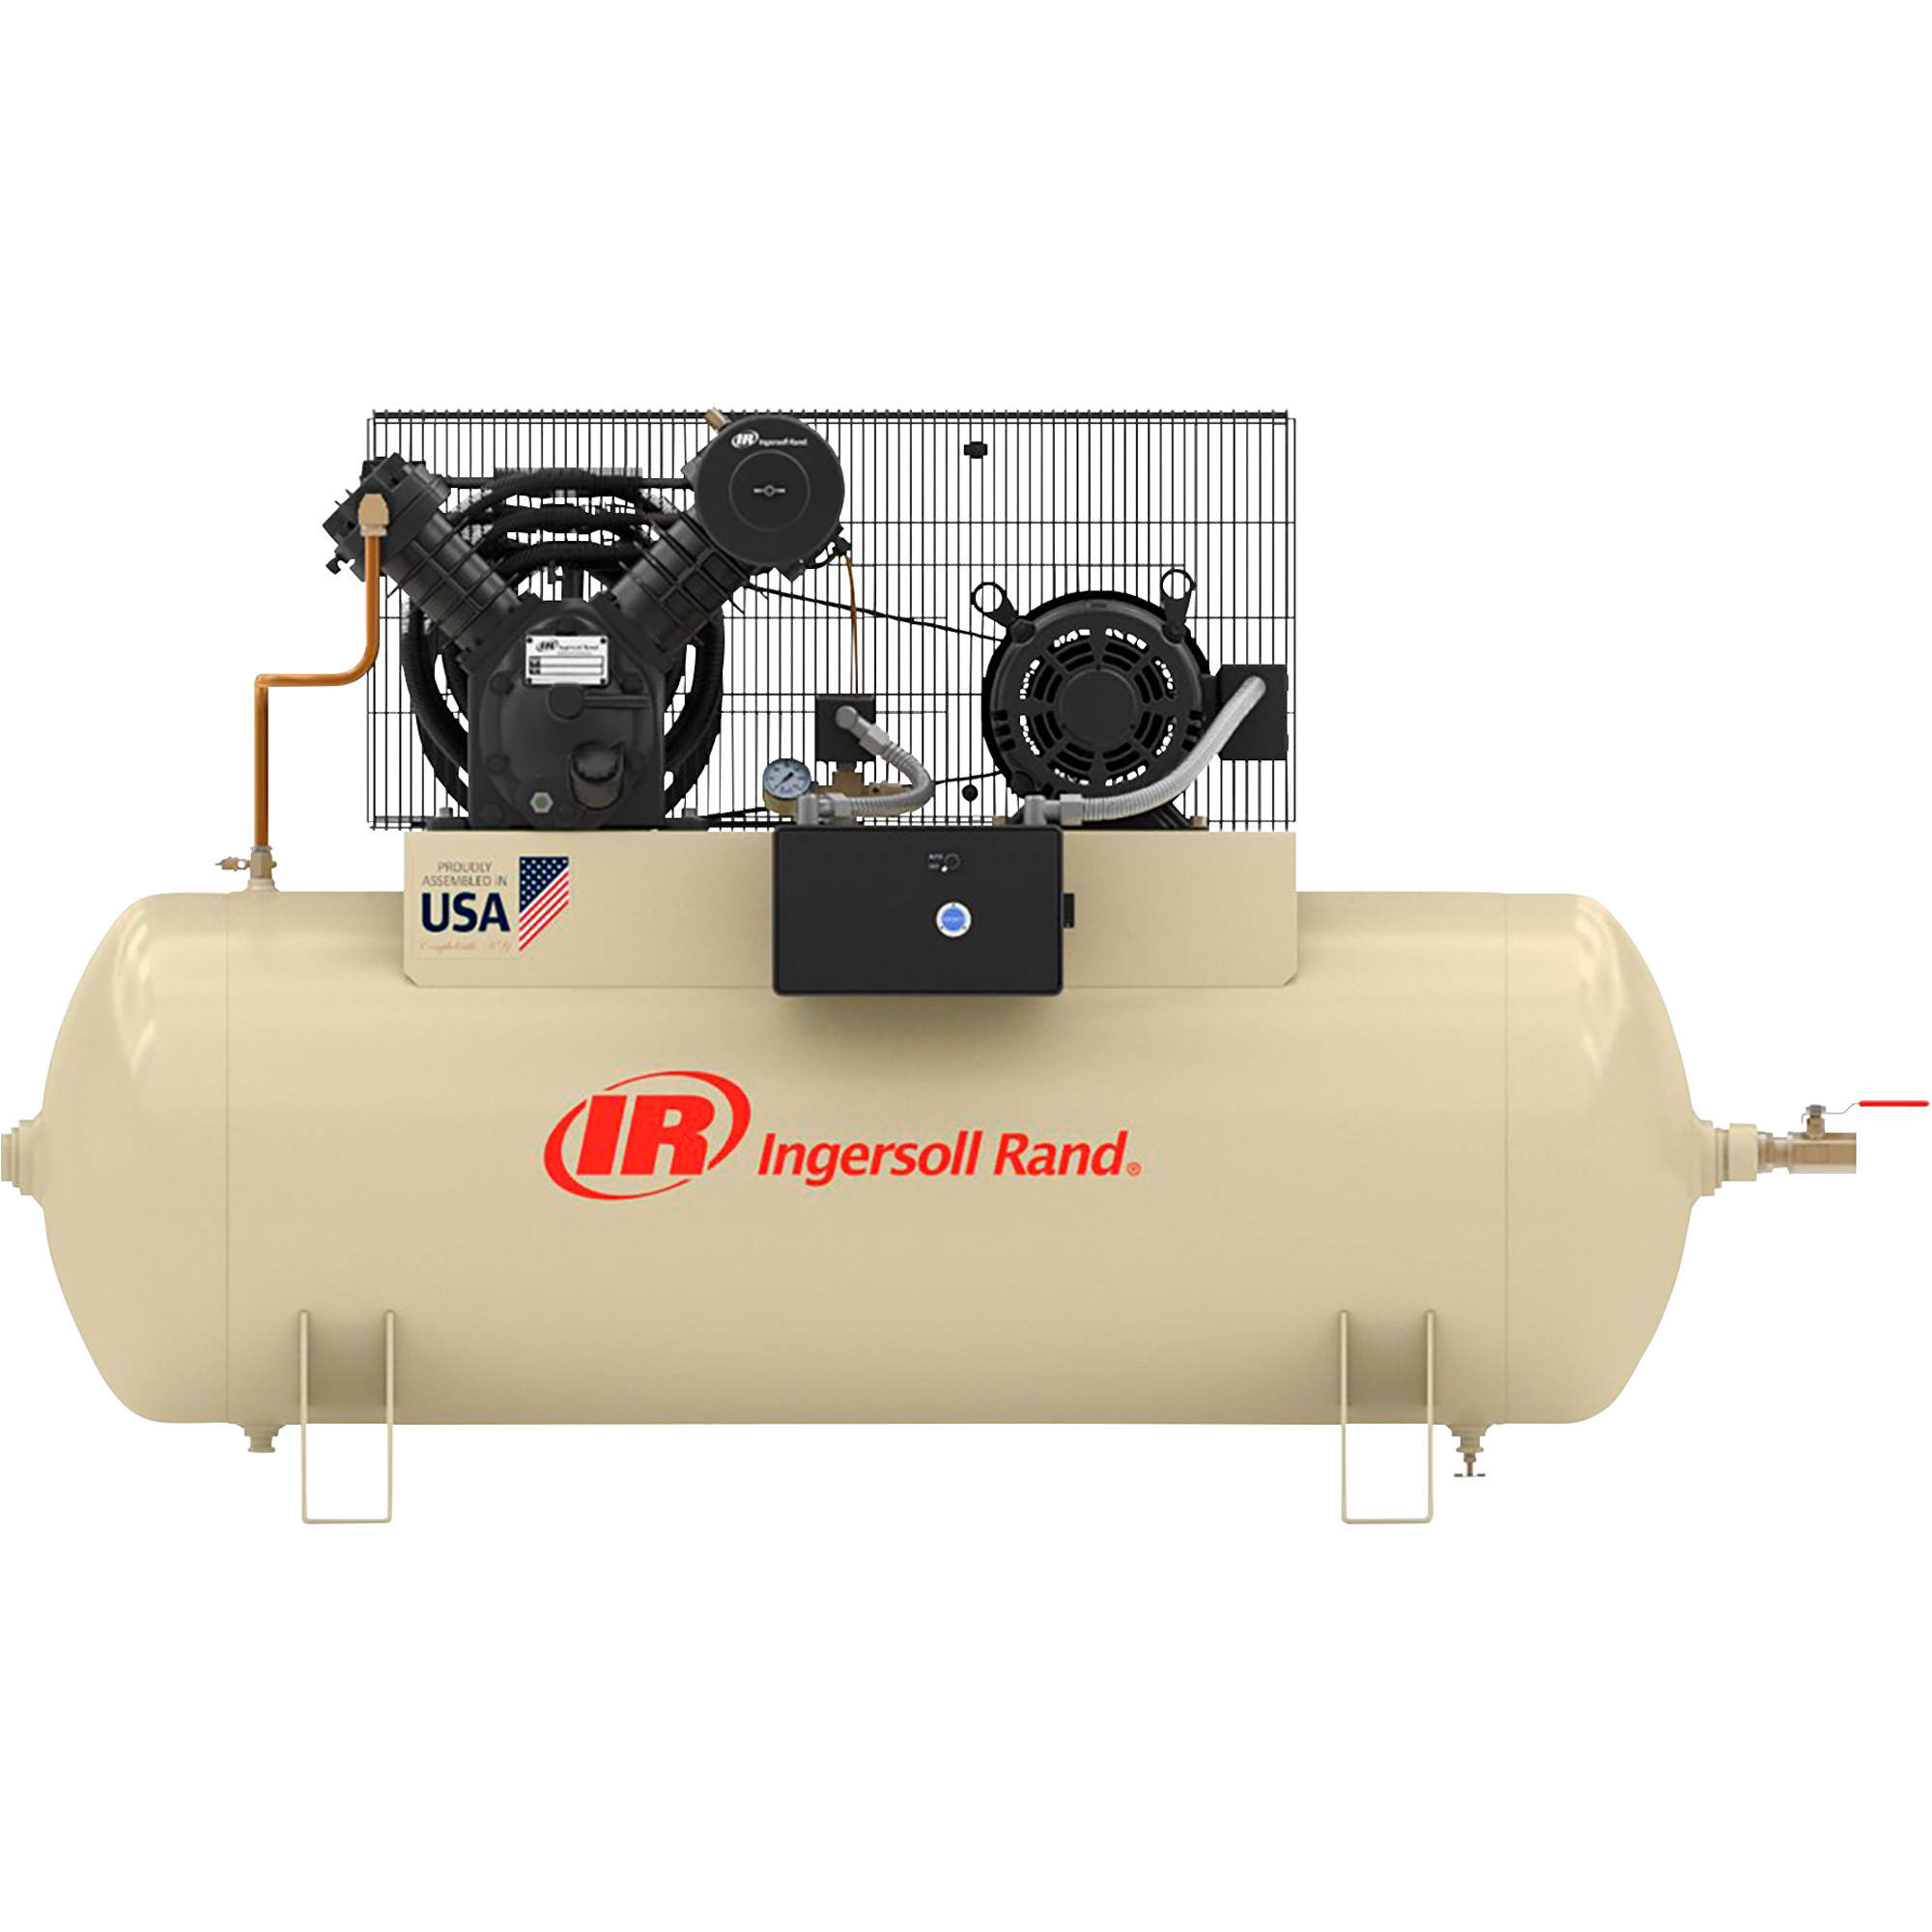 Ingersoll Rand Electric Stationary Air Compressor — 10 HP, 460 Volts, 3 Phase, 120 Gallon Horizontal, 35 CFM At 175 PSI, Model 2545E10-V -  45465739